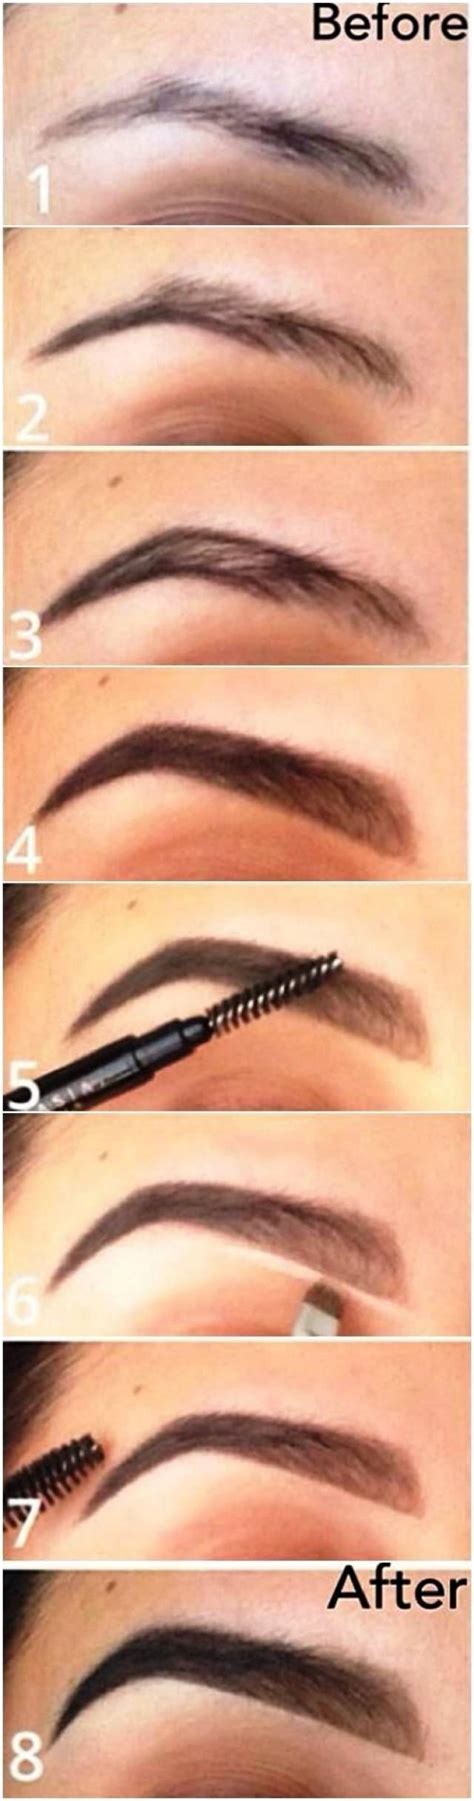 Tutorial How To Make Your Eyebrows Thicker With Makeup 2212338 Weddbook